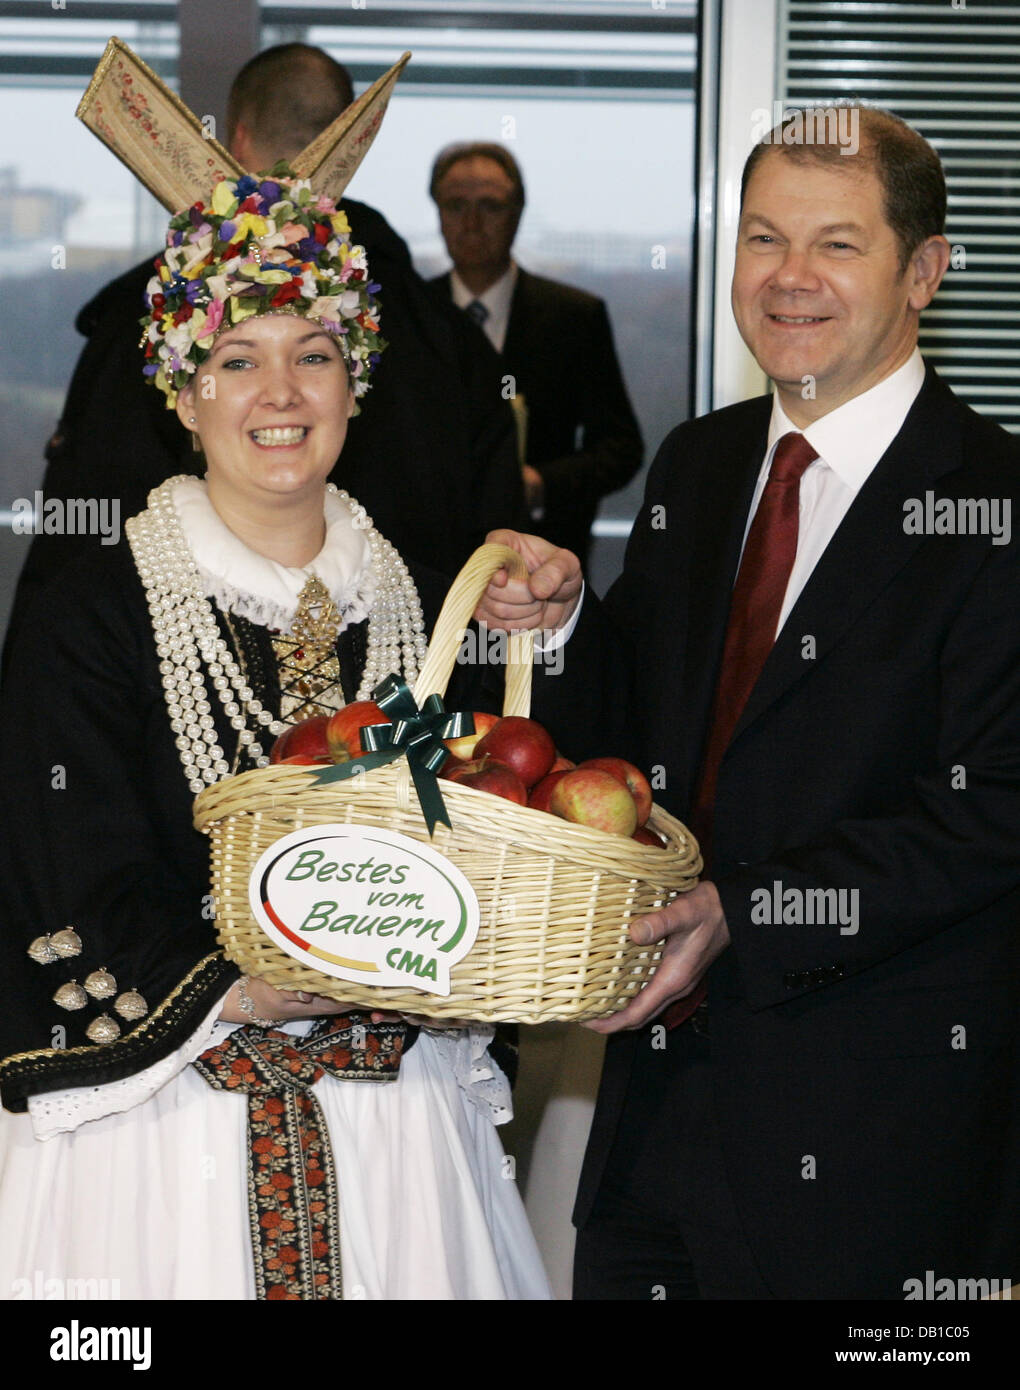 Labour Minister Olaf Scholz holds a basket he was presented with by the  Altes Land Blossom Queen Kathrin Feindt (L) prior to a cabinet meeting at  the Chancellery in Berlin, Wednesday, 5